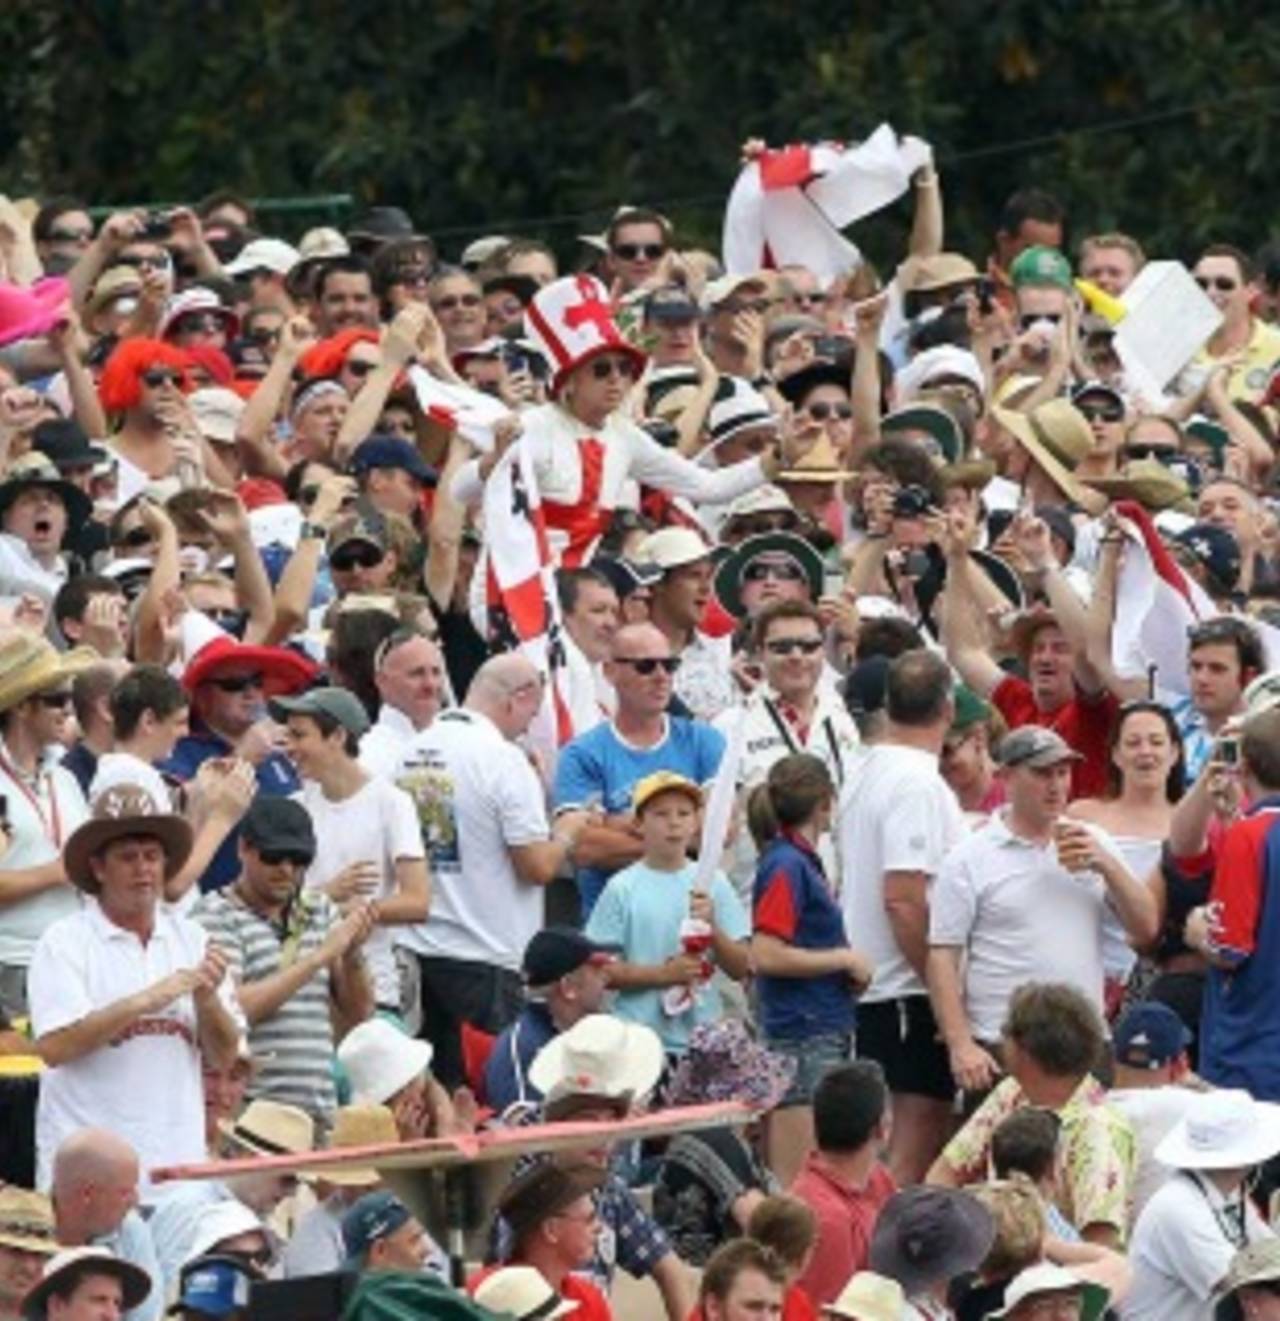 There was plenty for the England fans to cheer, but the locals looked for other ways to spend their time&nbsp;&nbsp;&bull;&nbsp;&nbsp;Getty Images